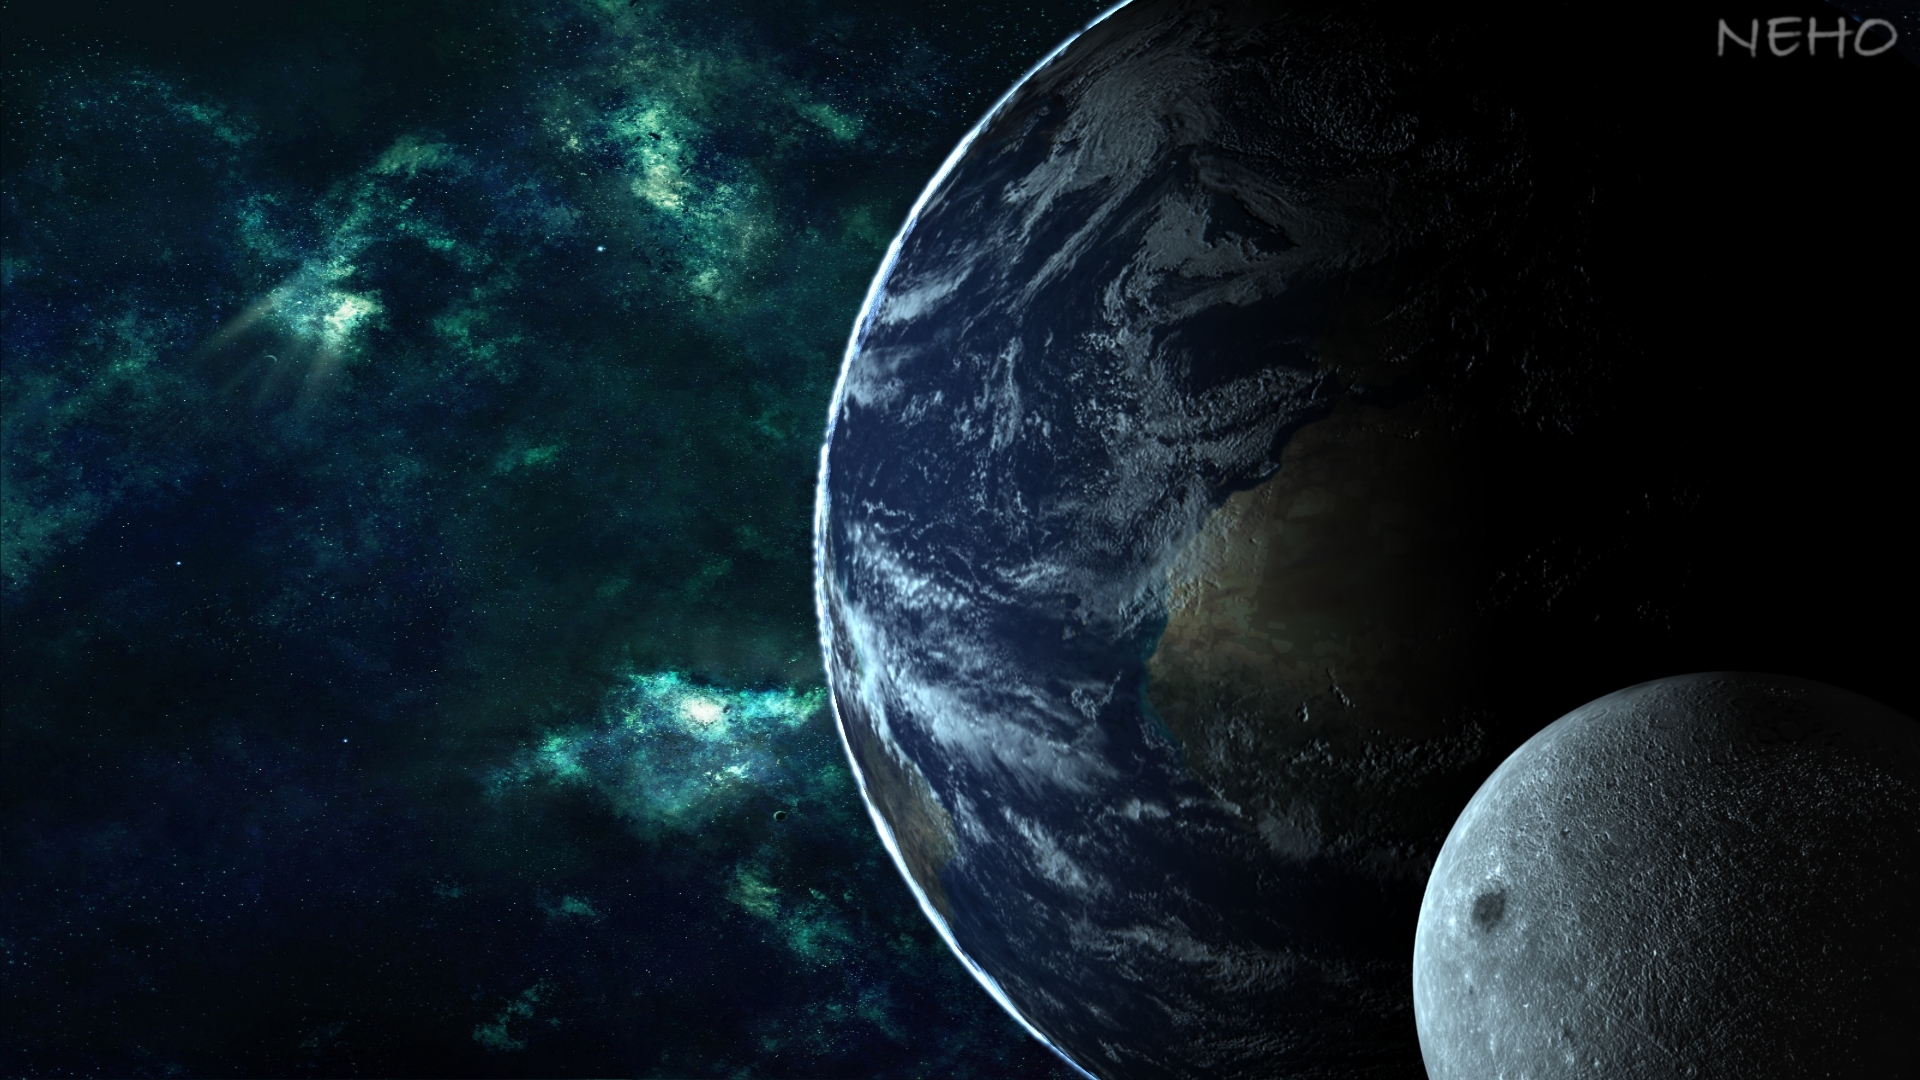 45+ Earth from the Moon Wallpaper on WallpaperSafari Earth Wallpapers 1920x...